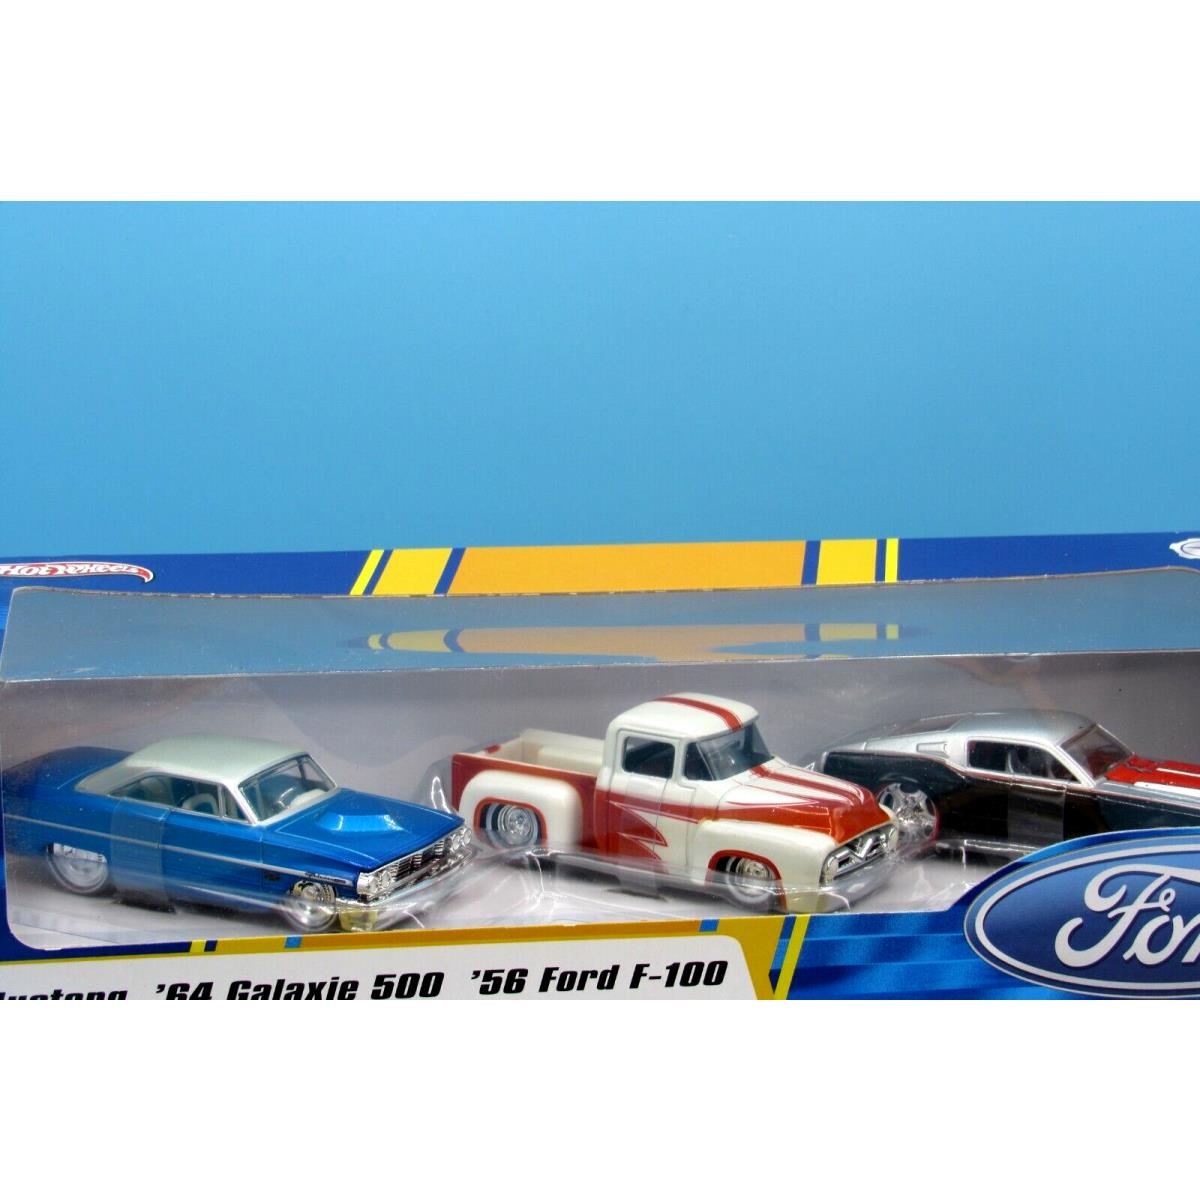 Hot Wheels Vhtf 1:50 Scale Ford 3 Pack Series 68 Mustang 64 Galaxie 56 F-100